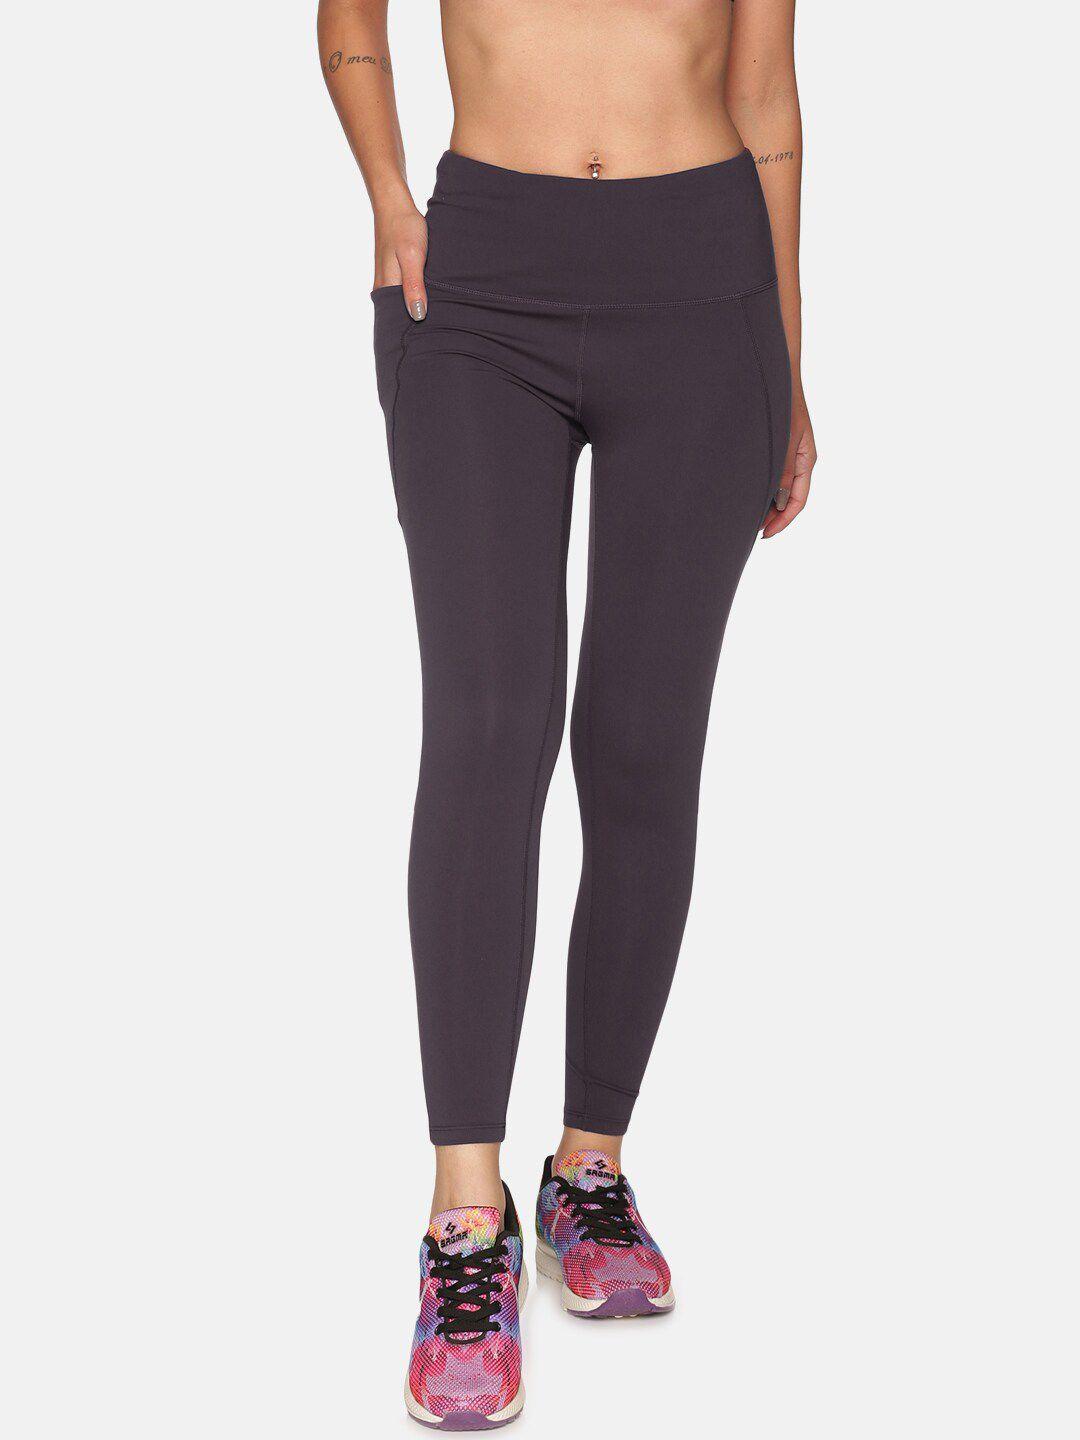 BlissClub Women Grey Super Stretchy and High Waisted The Ultimate Leggings